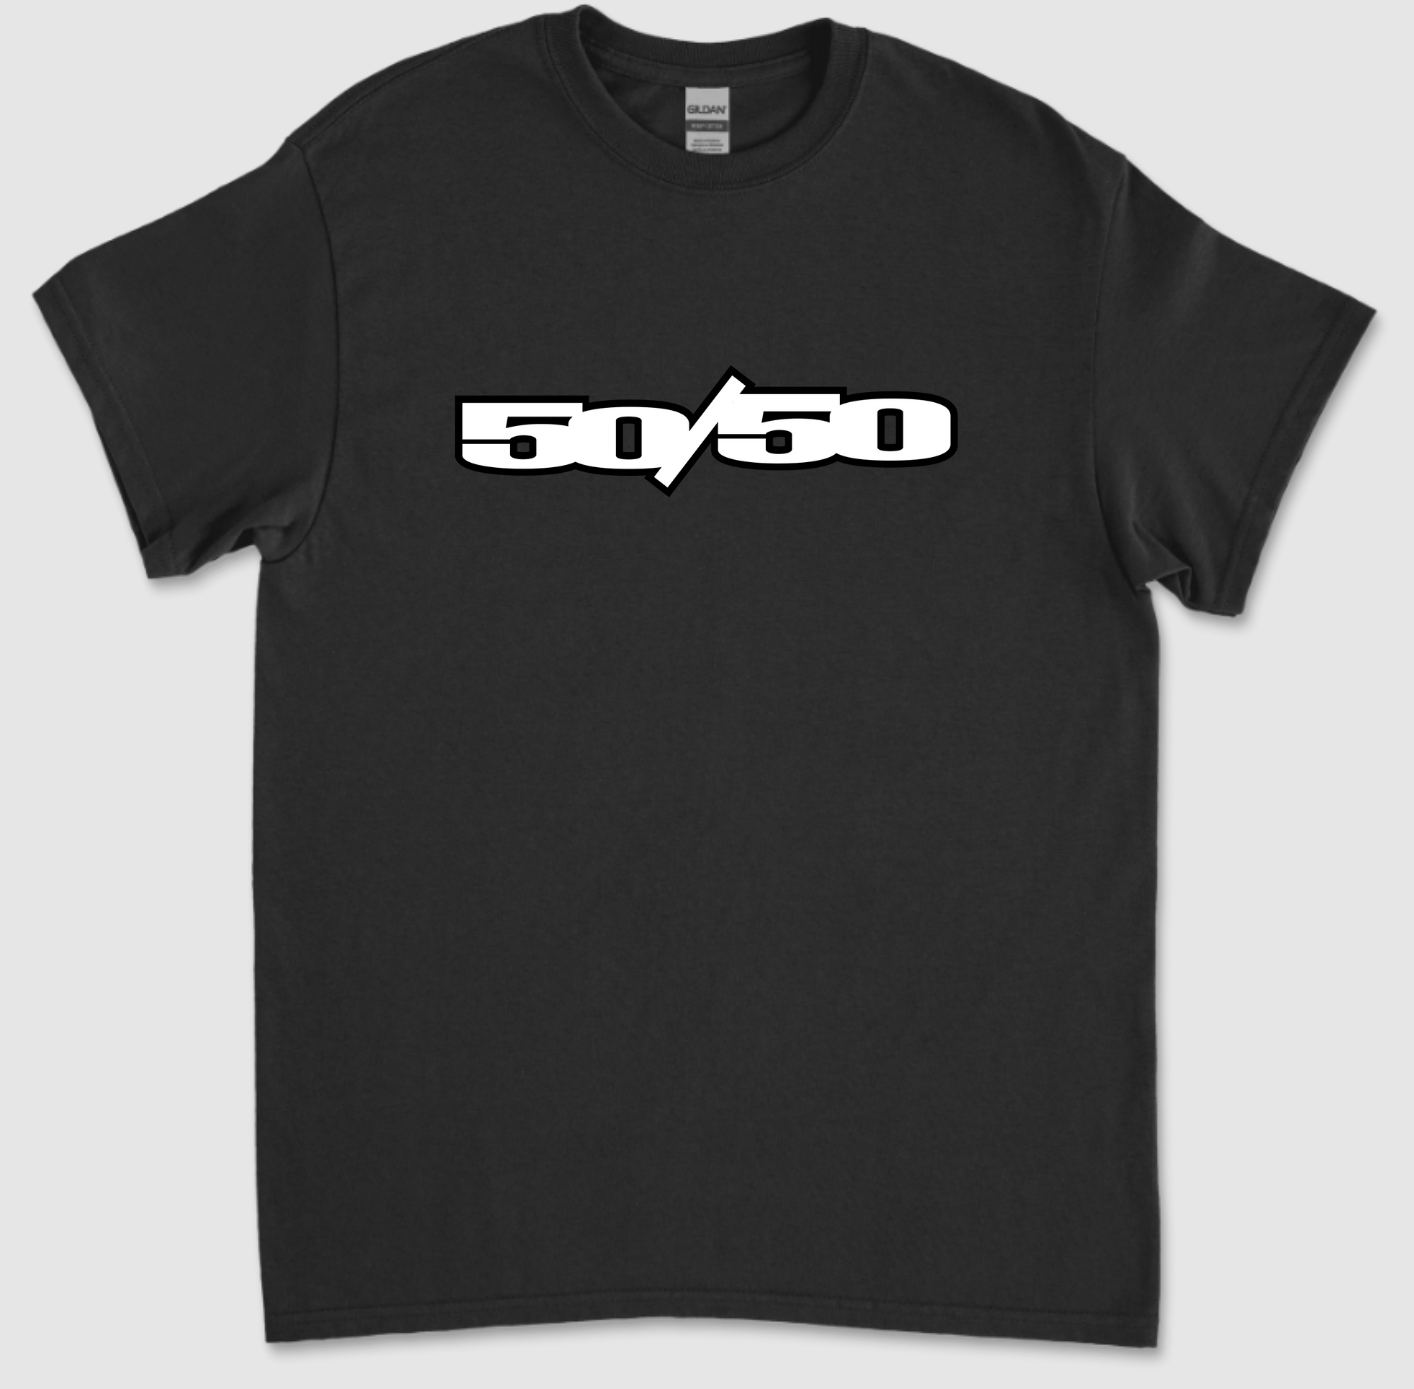 Skateboard T-Shirts & Hoodies - Free Shipping for Orders Over $50